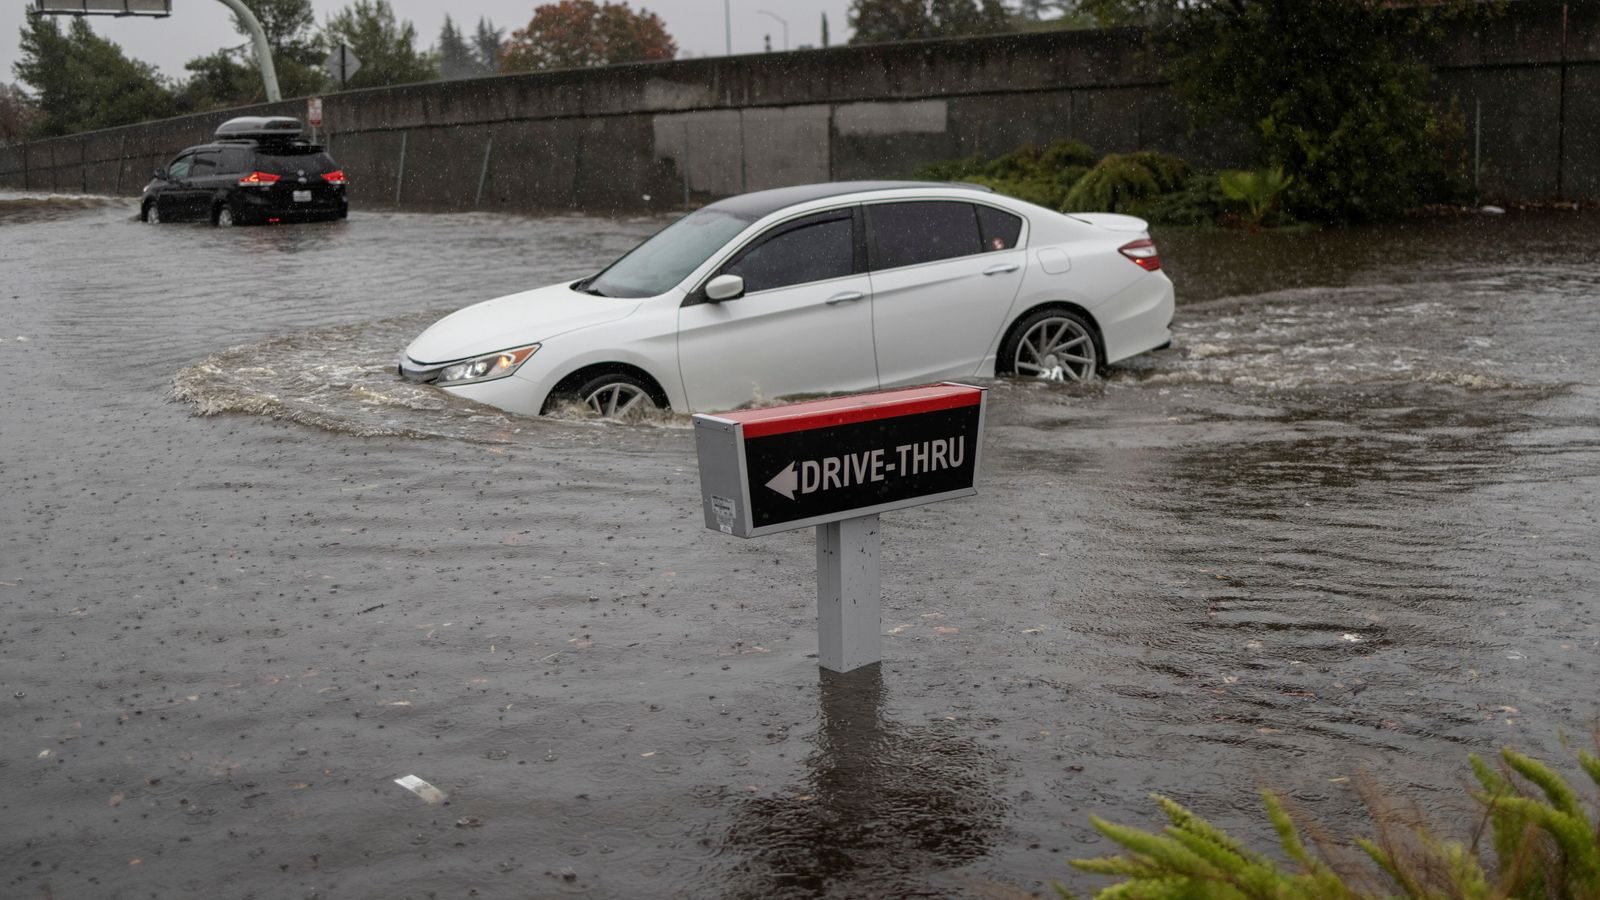 A vehicle drives through a flooded area